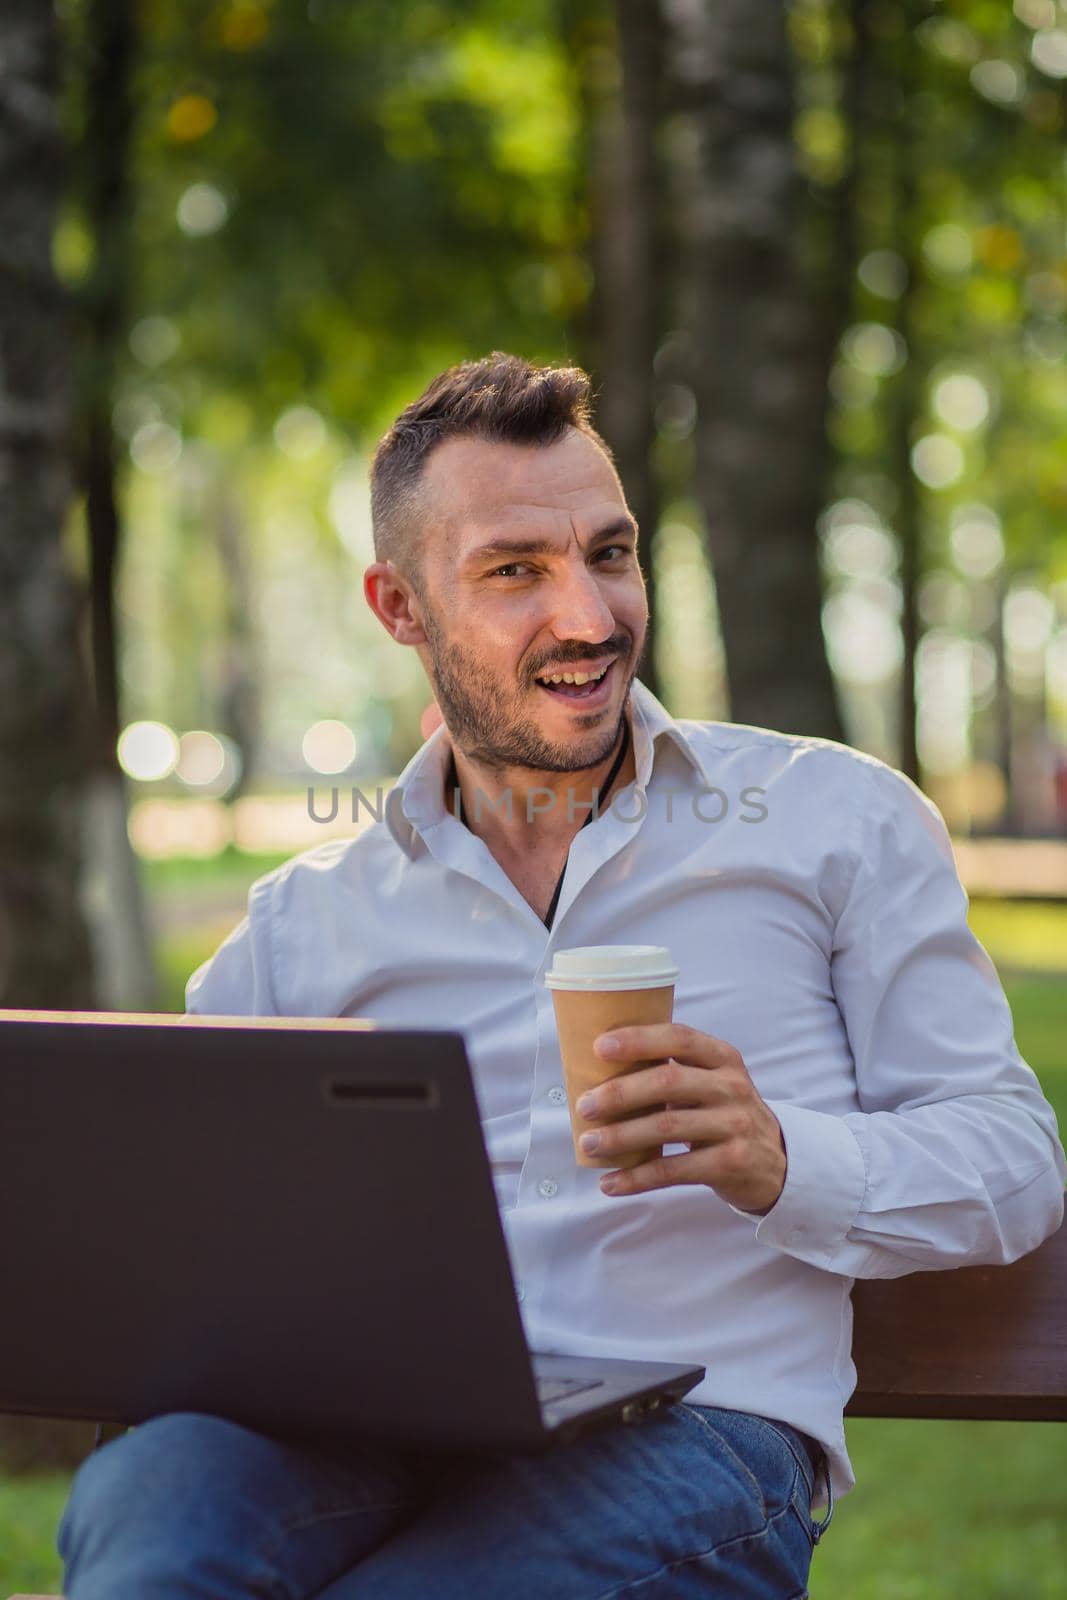 Laughing businessman is working in the park with a laptop, drinking coffee. by anarni33